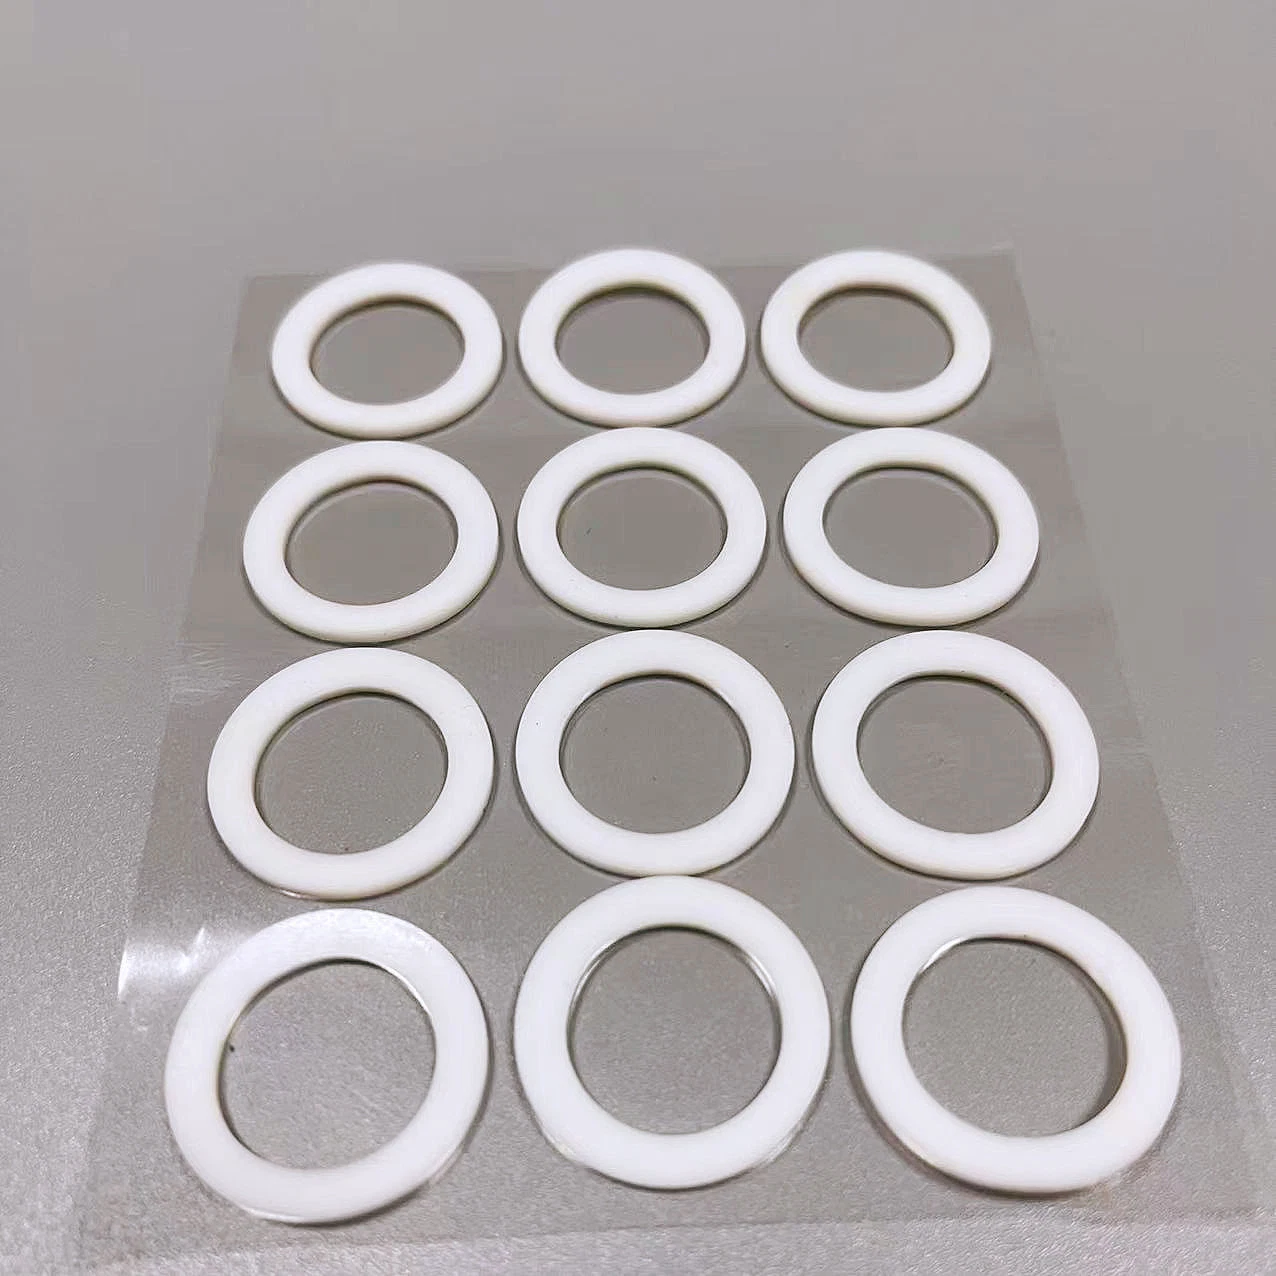 The Most Popular Silicone Gasket Manufacturer Silicone Flat Silicone Gaskets